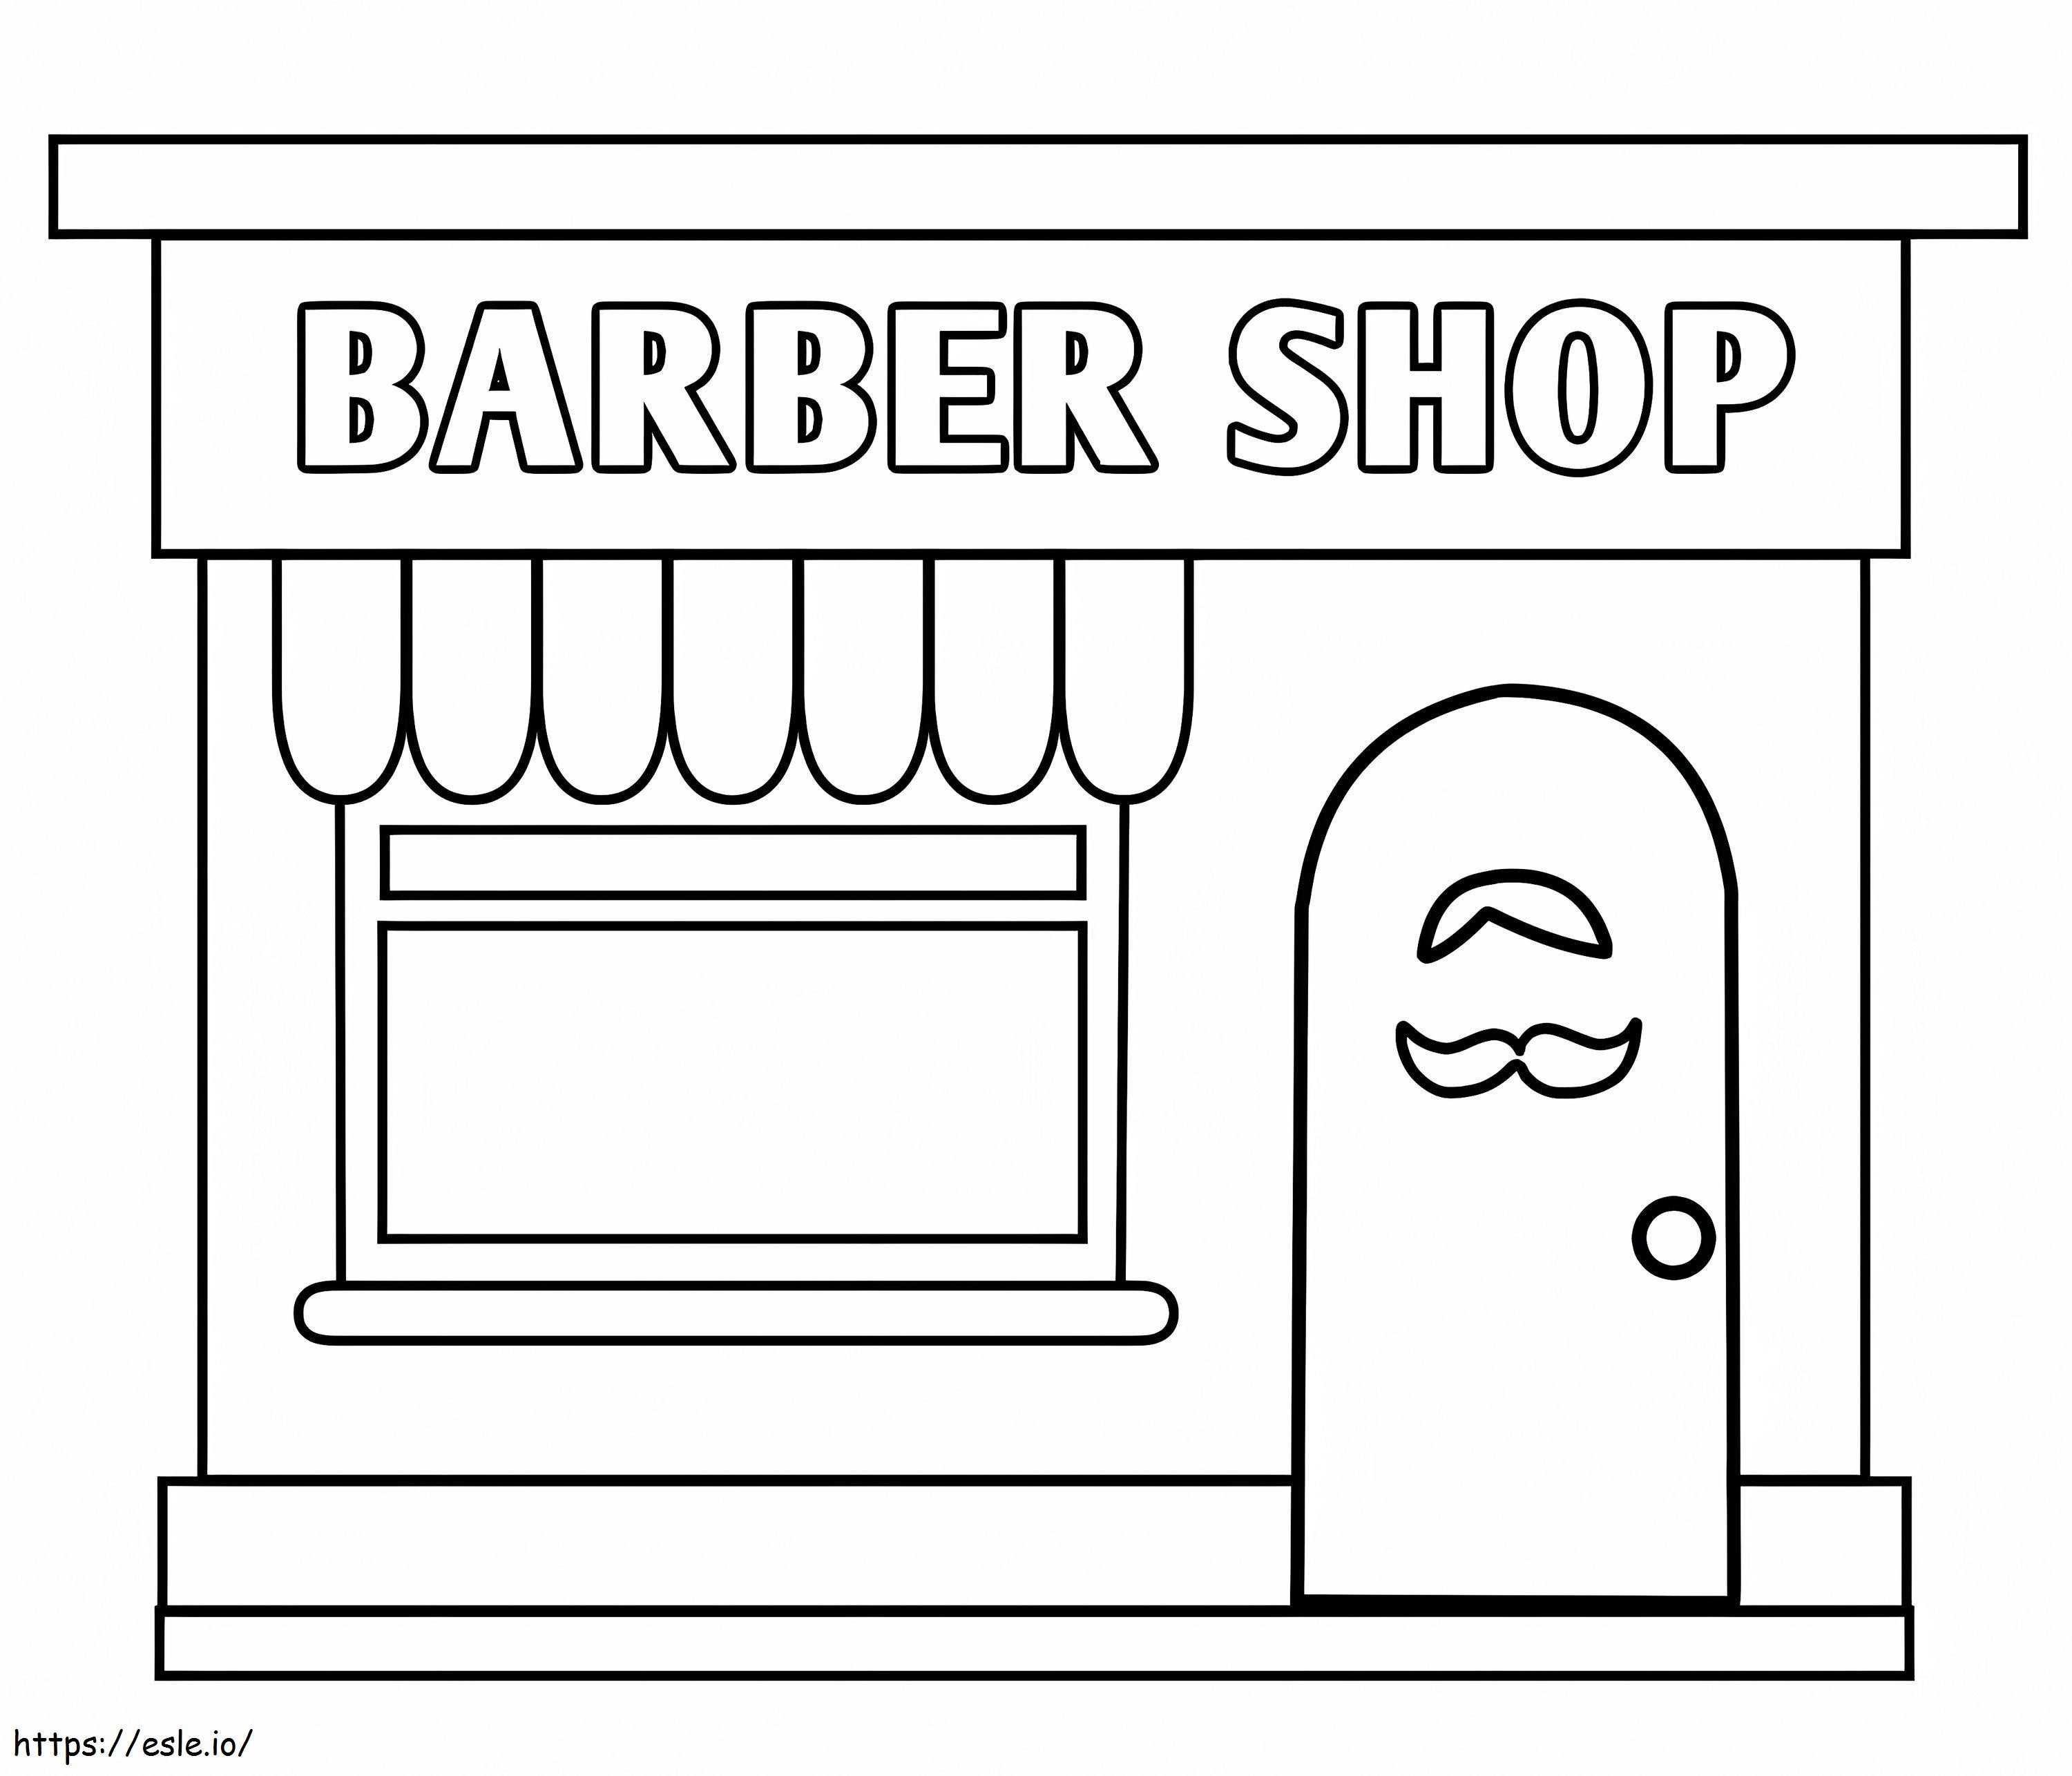 Printable Barber Shop coloring page